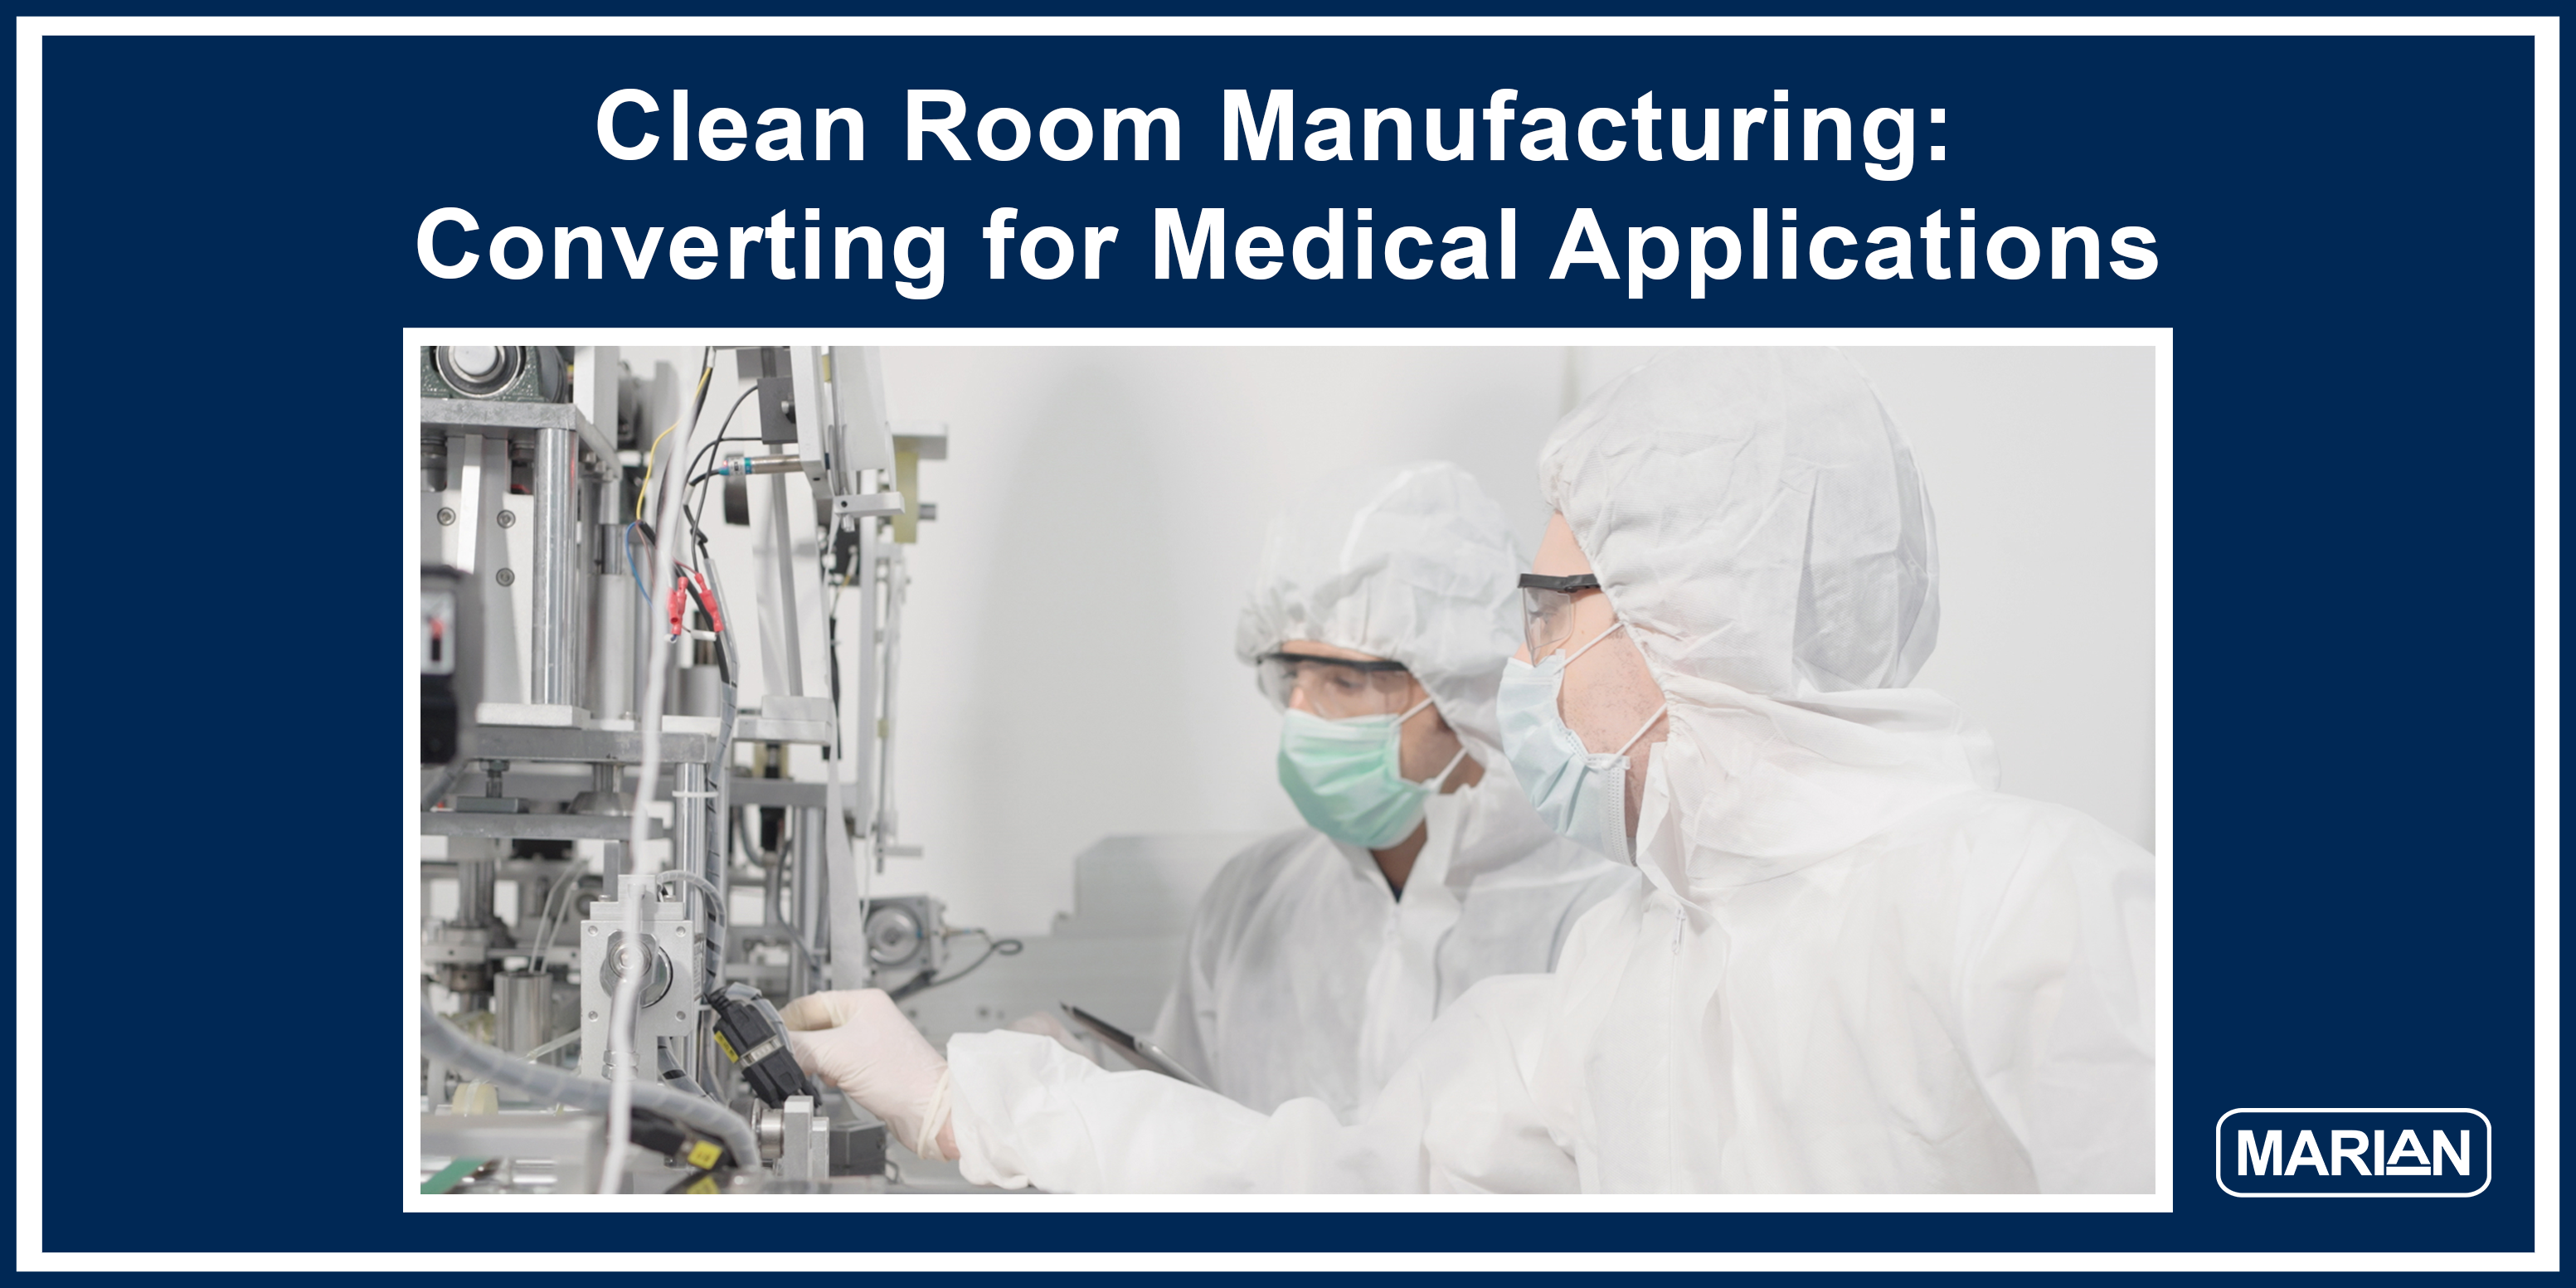 Clean Room Manufacturing: Converting for Medical Applications